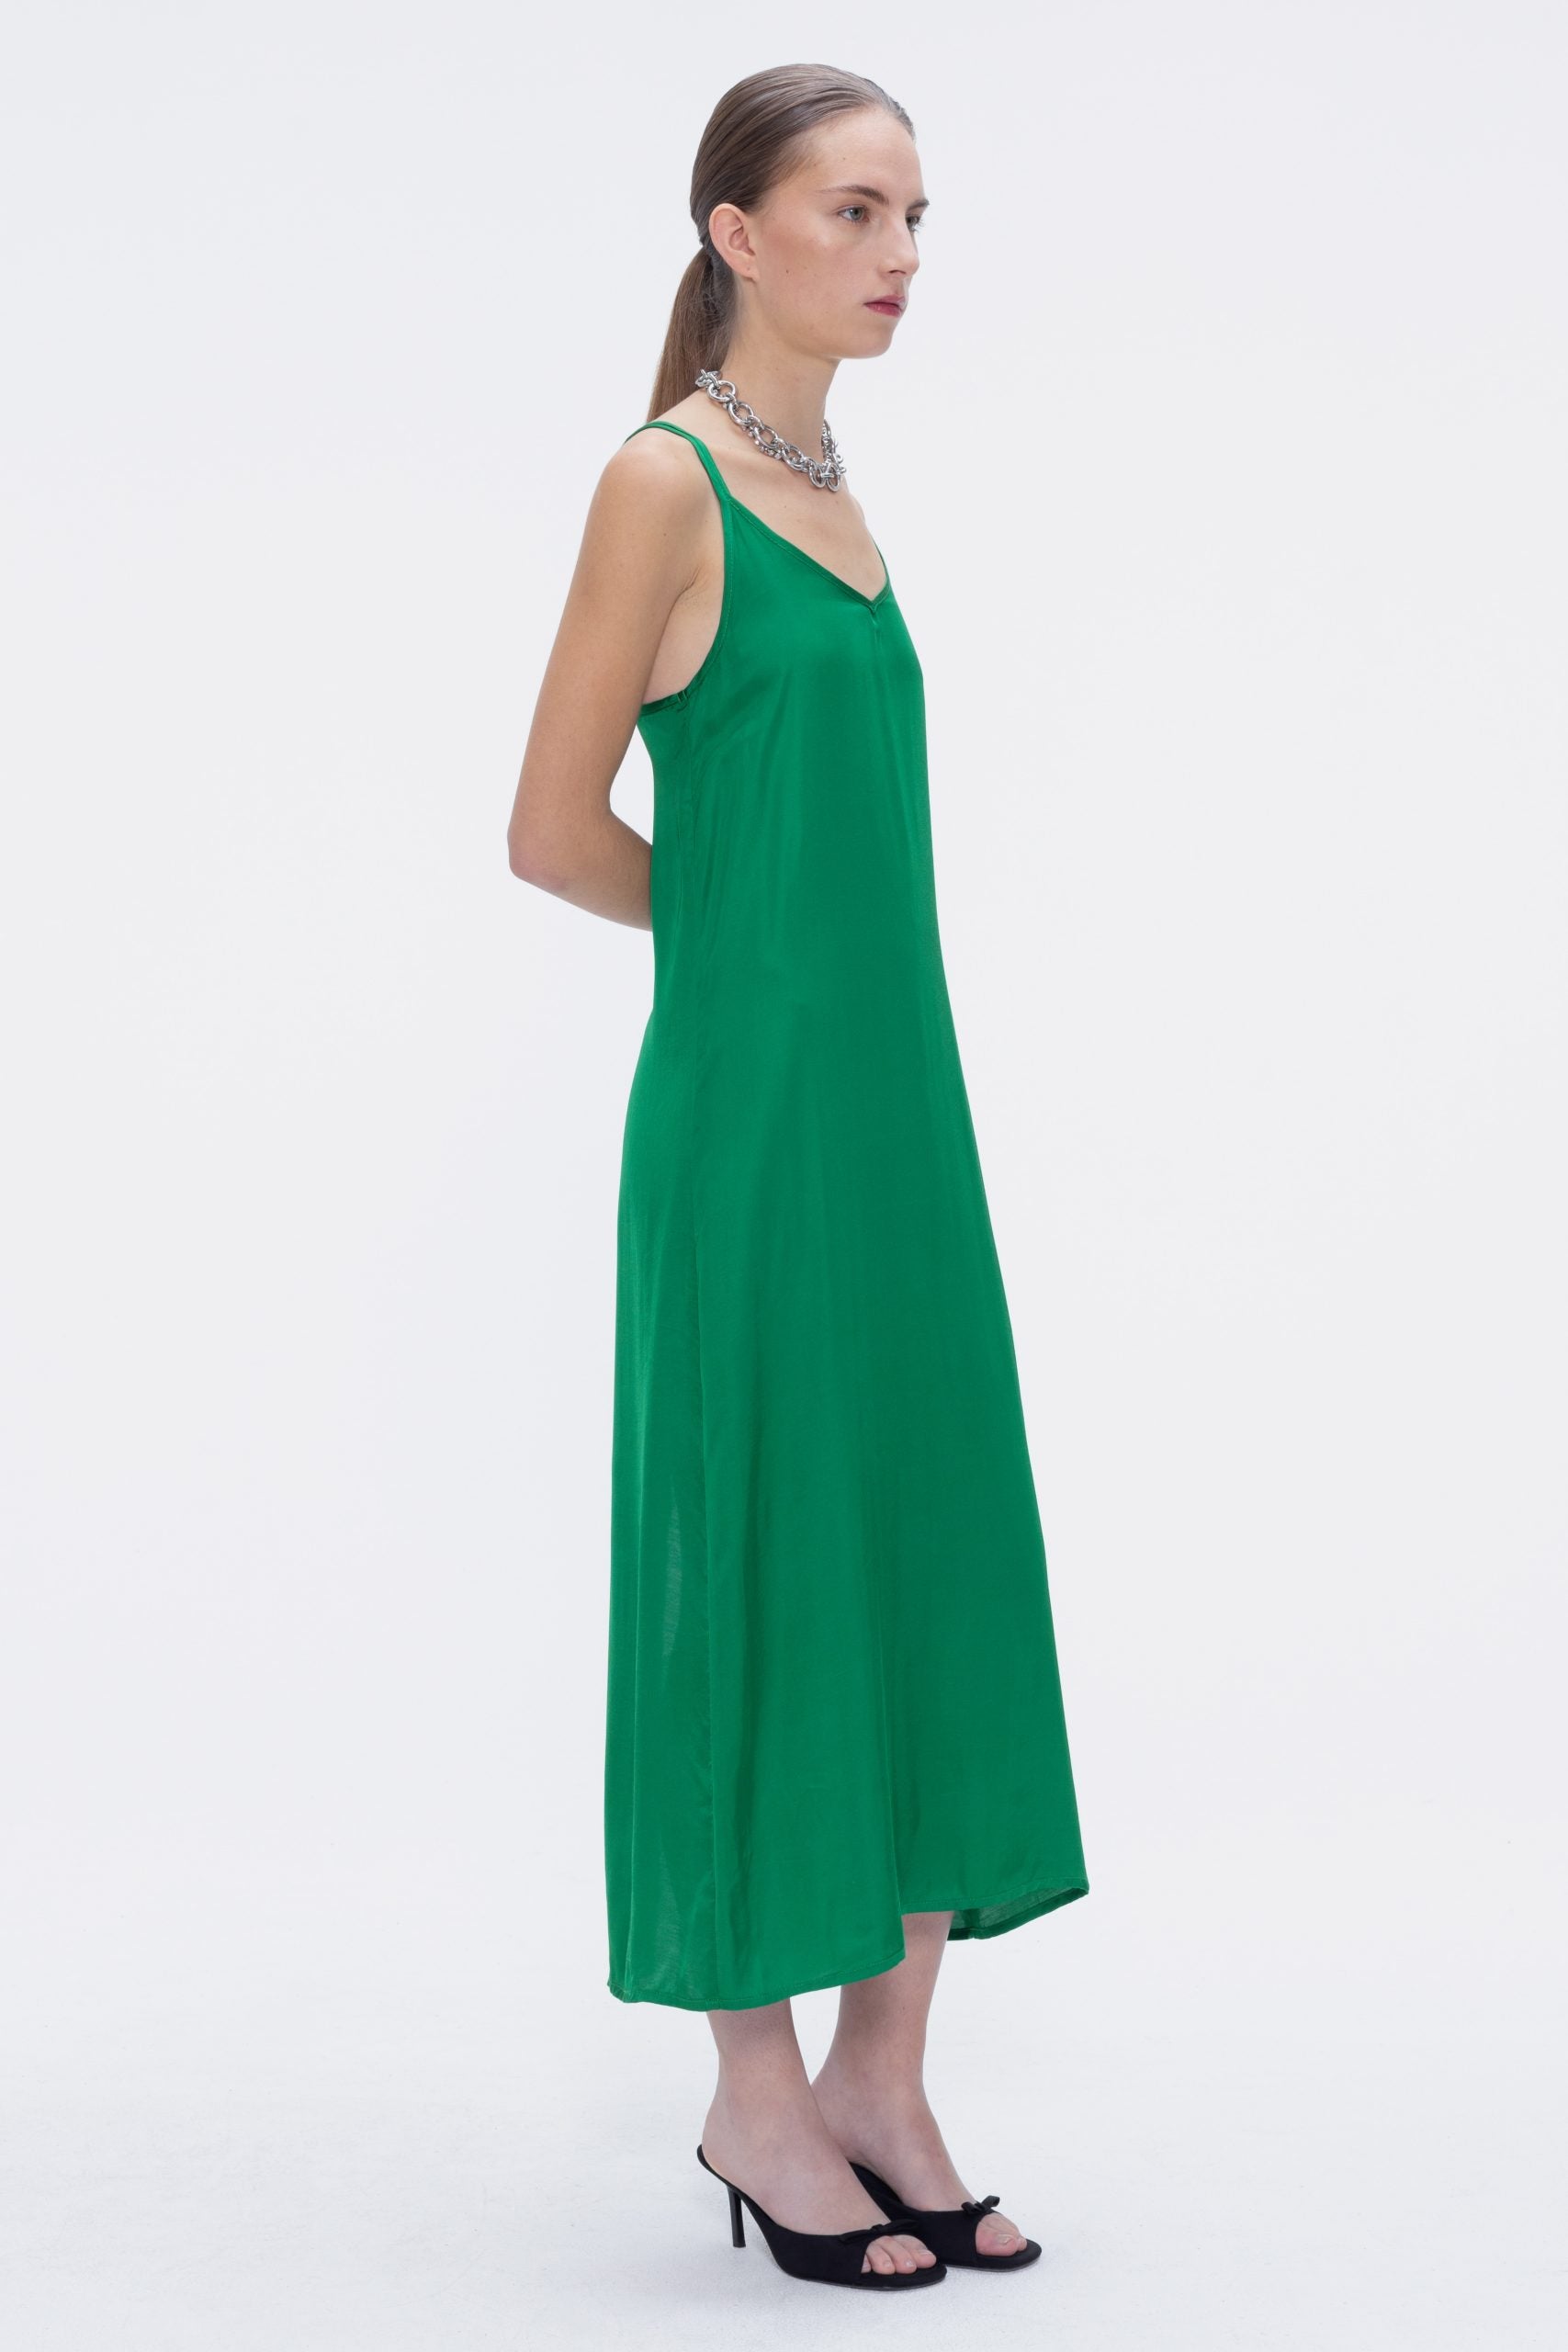 Our Sister Canyon Uni Dress with Straps Green-Dresses-West of Woodward Boutique-Vancouver-Canada